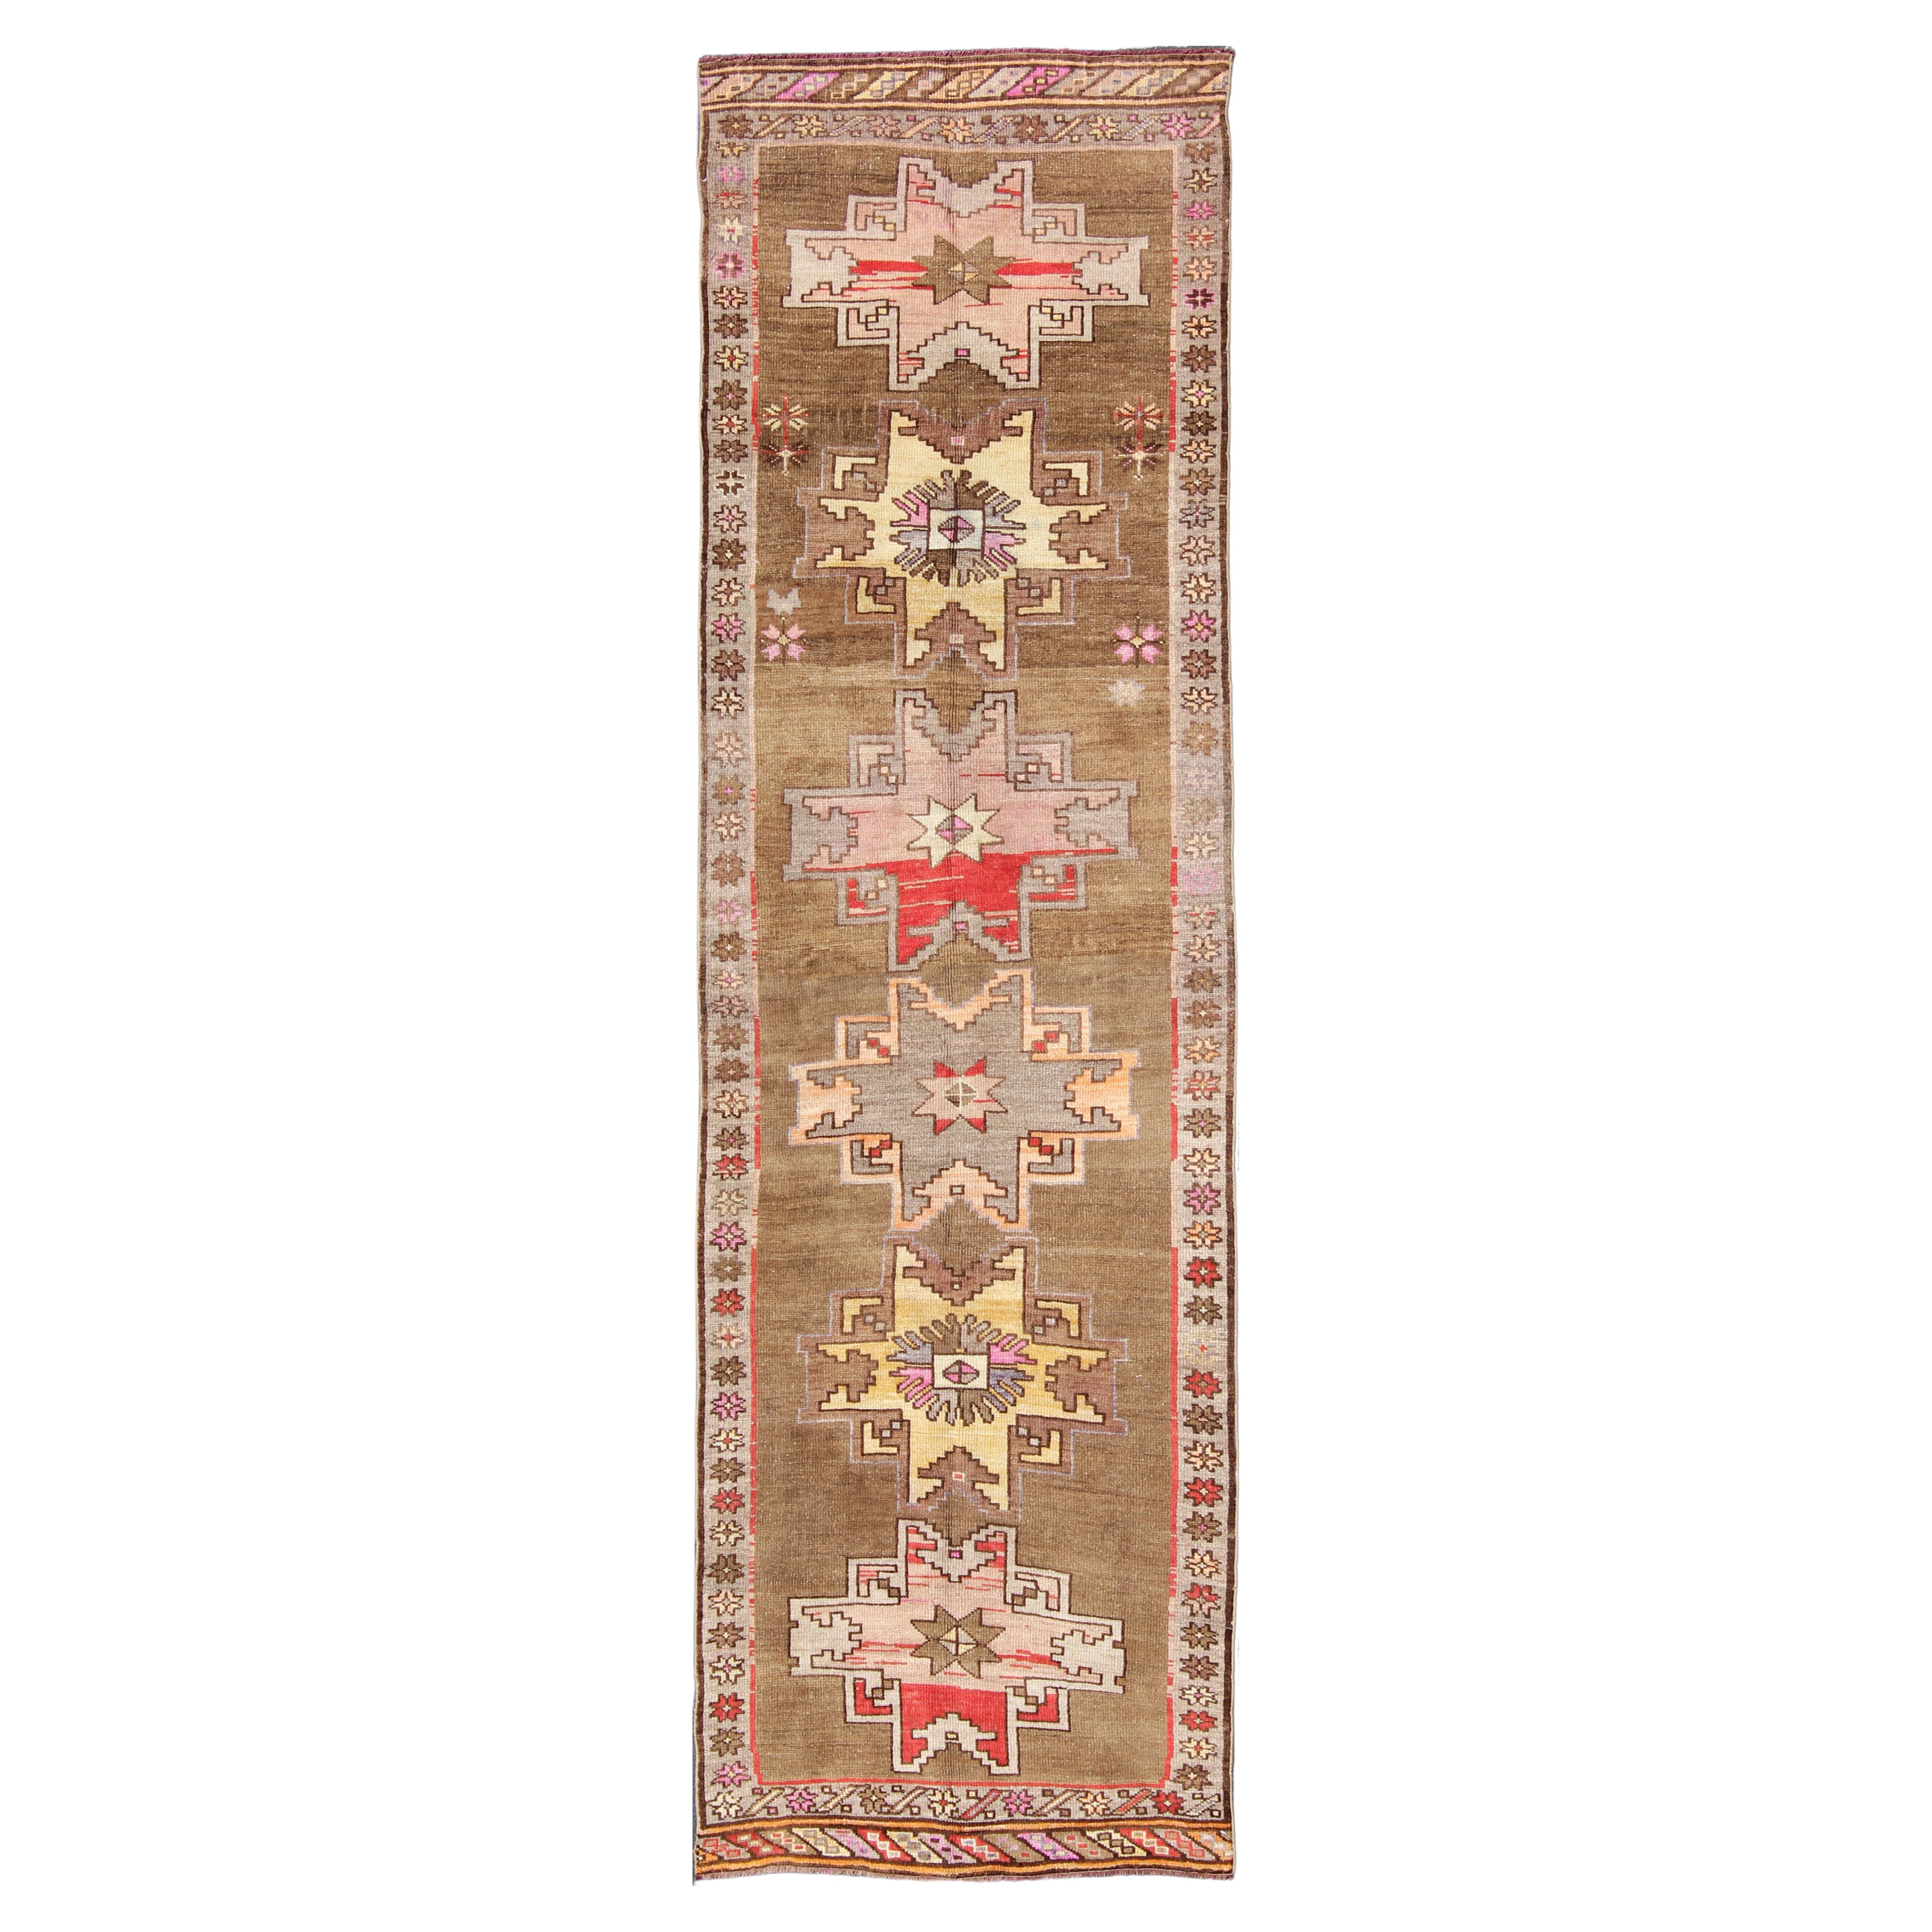 Unique & Colorful Turkish Kars  Runner with Tribal Designs and Geometric Motifs